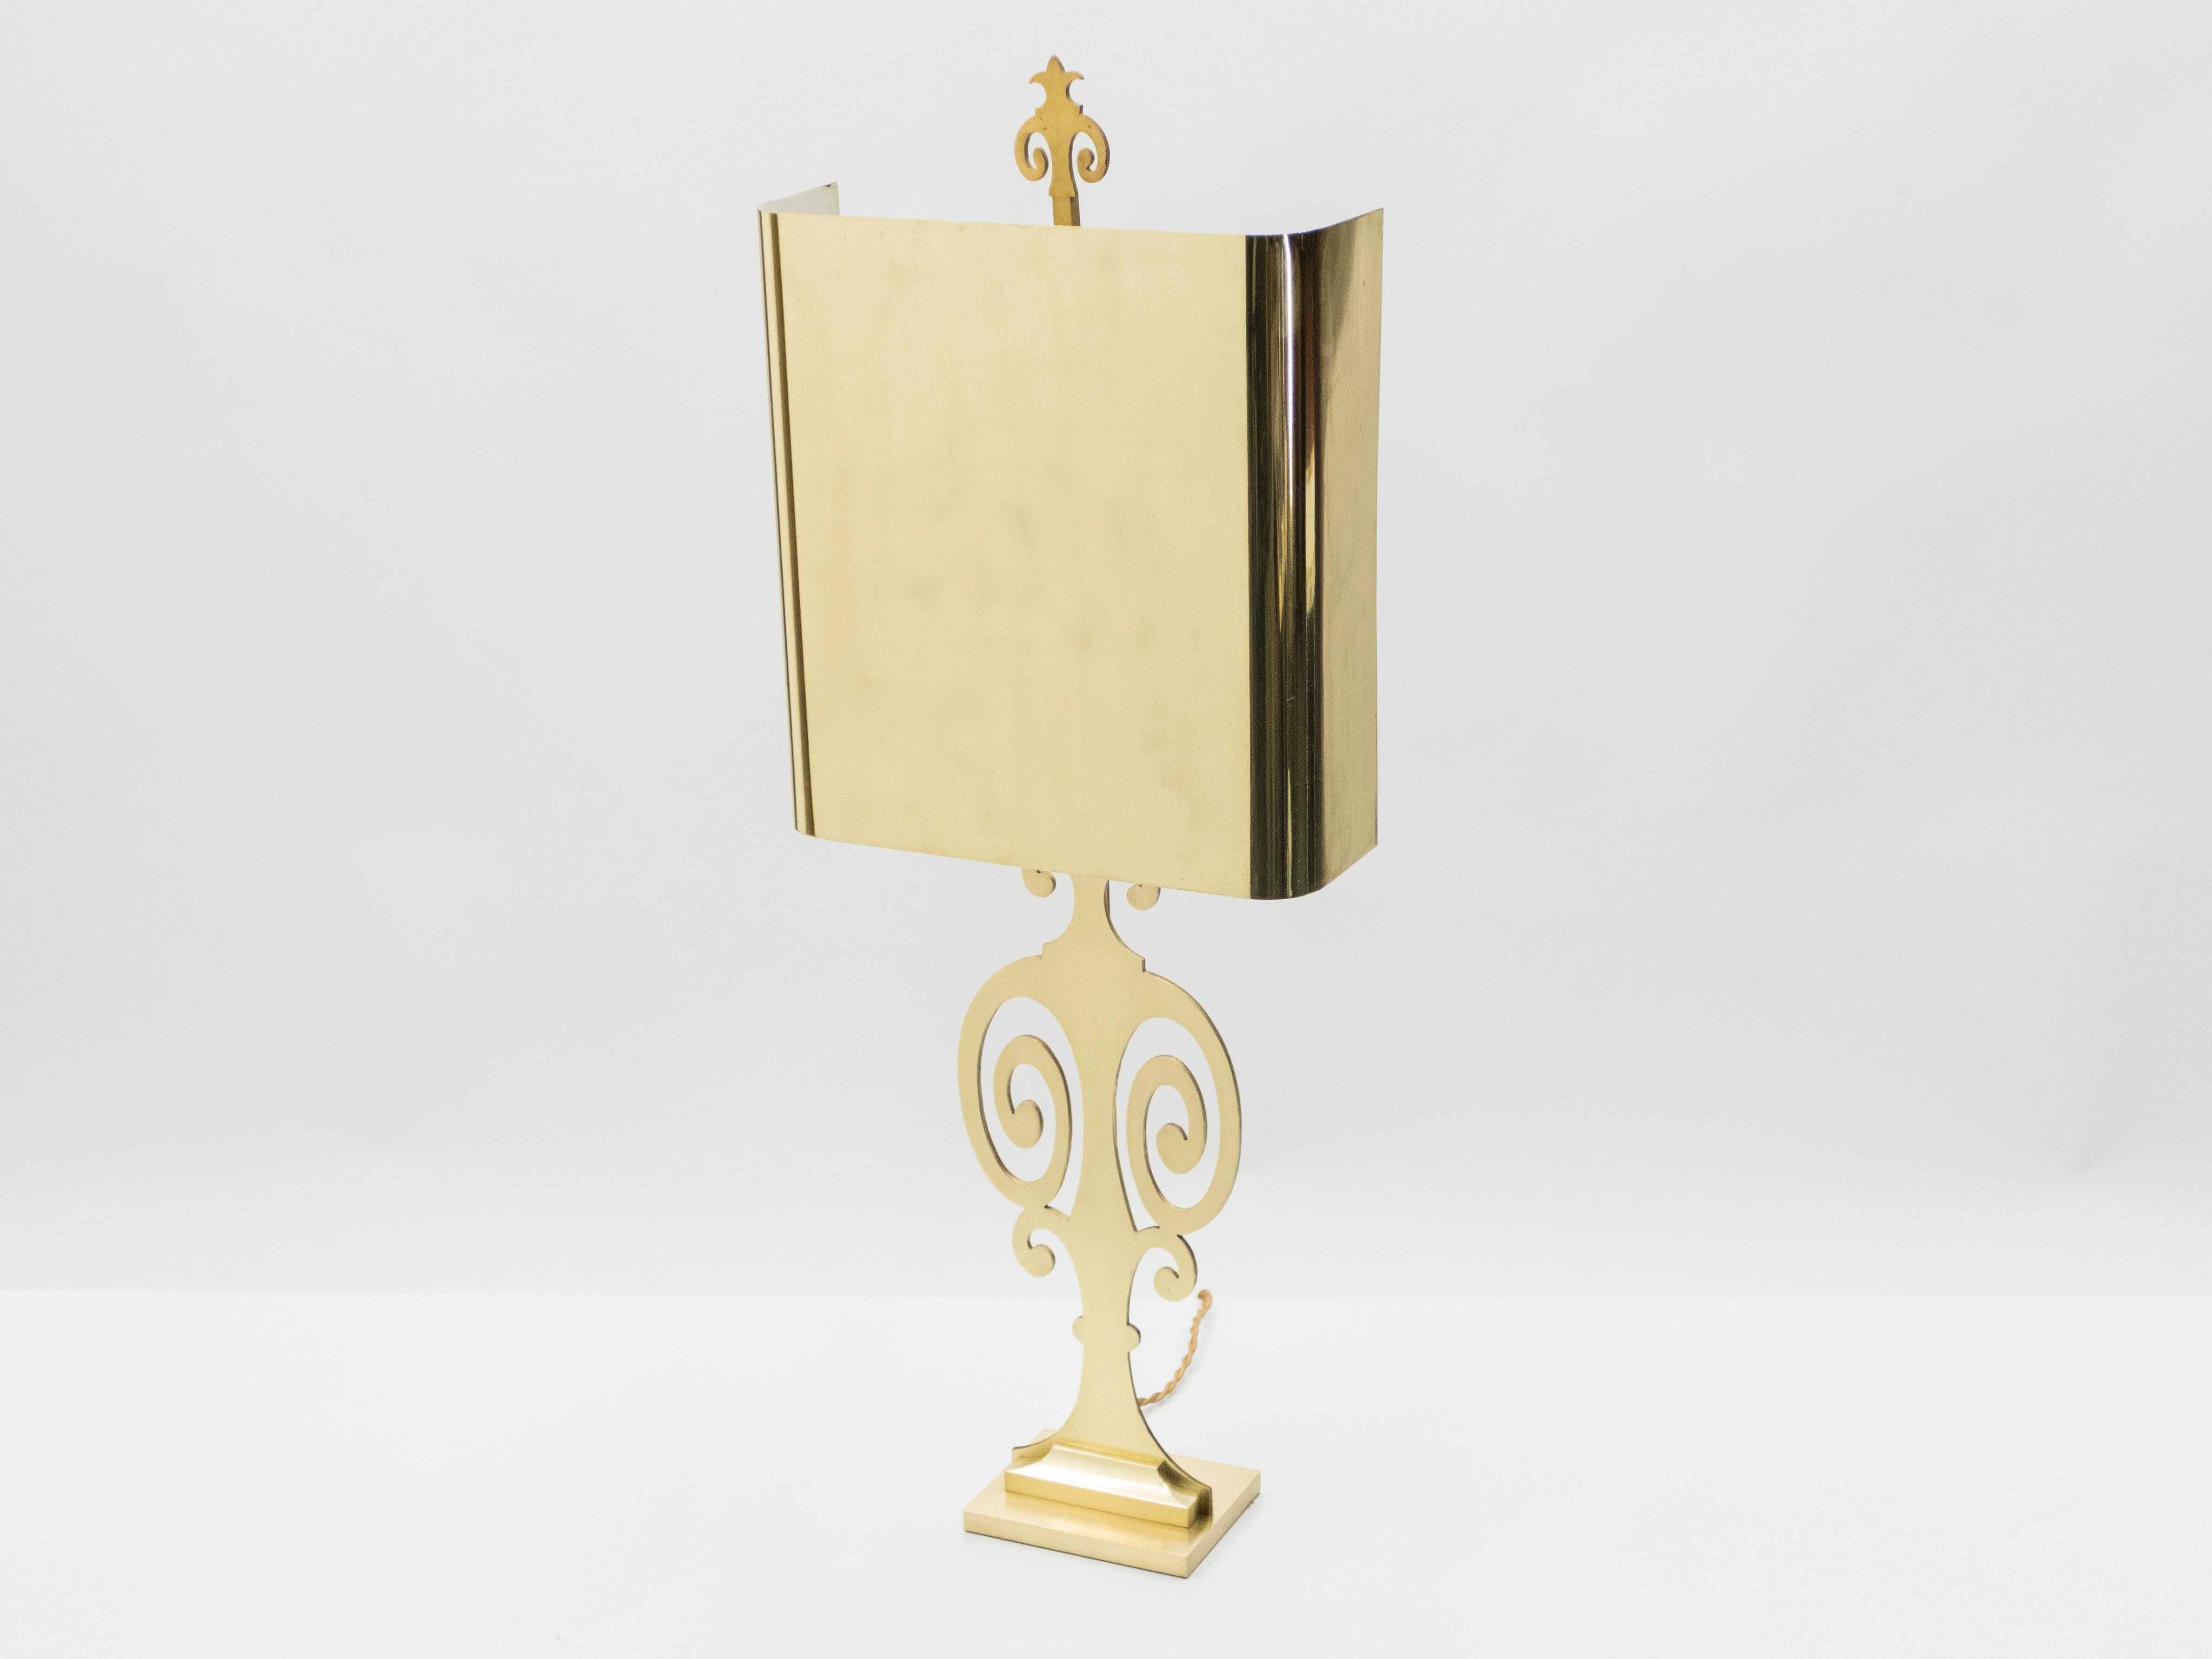 French Maison Charles table lamps usually use nature and history as museS. With this glamorous arabesque brass design, and original brass lamp shade from Maison Charles, this lamp will for sure make a gracious compliment to both traditional and